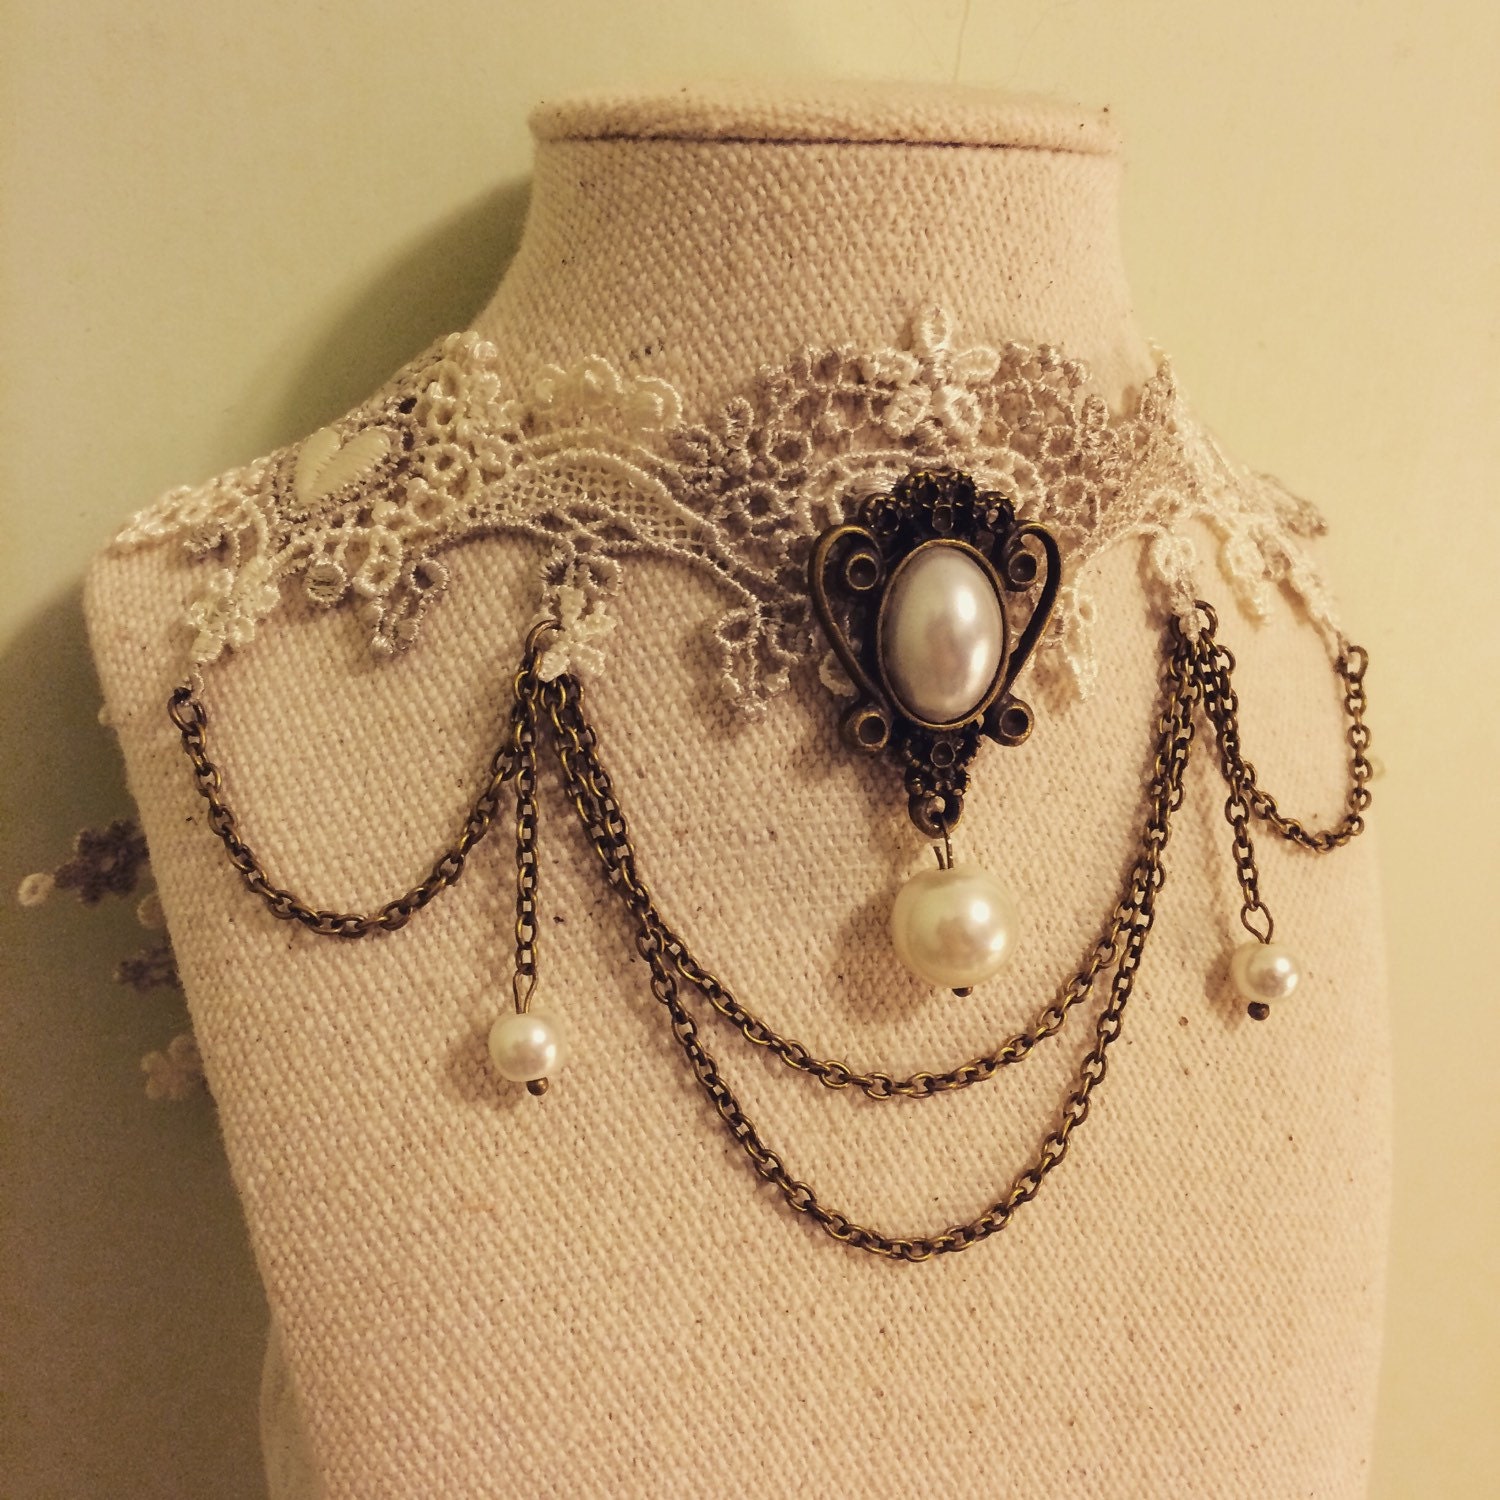 Victorian Ivory Lace Choker with Chain and Pearls